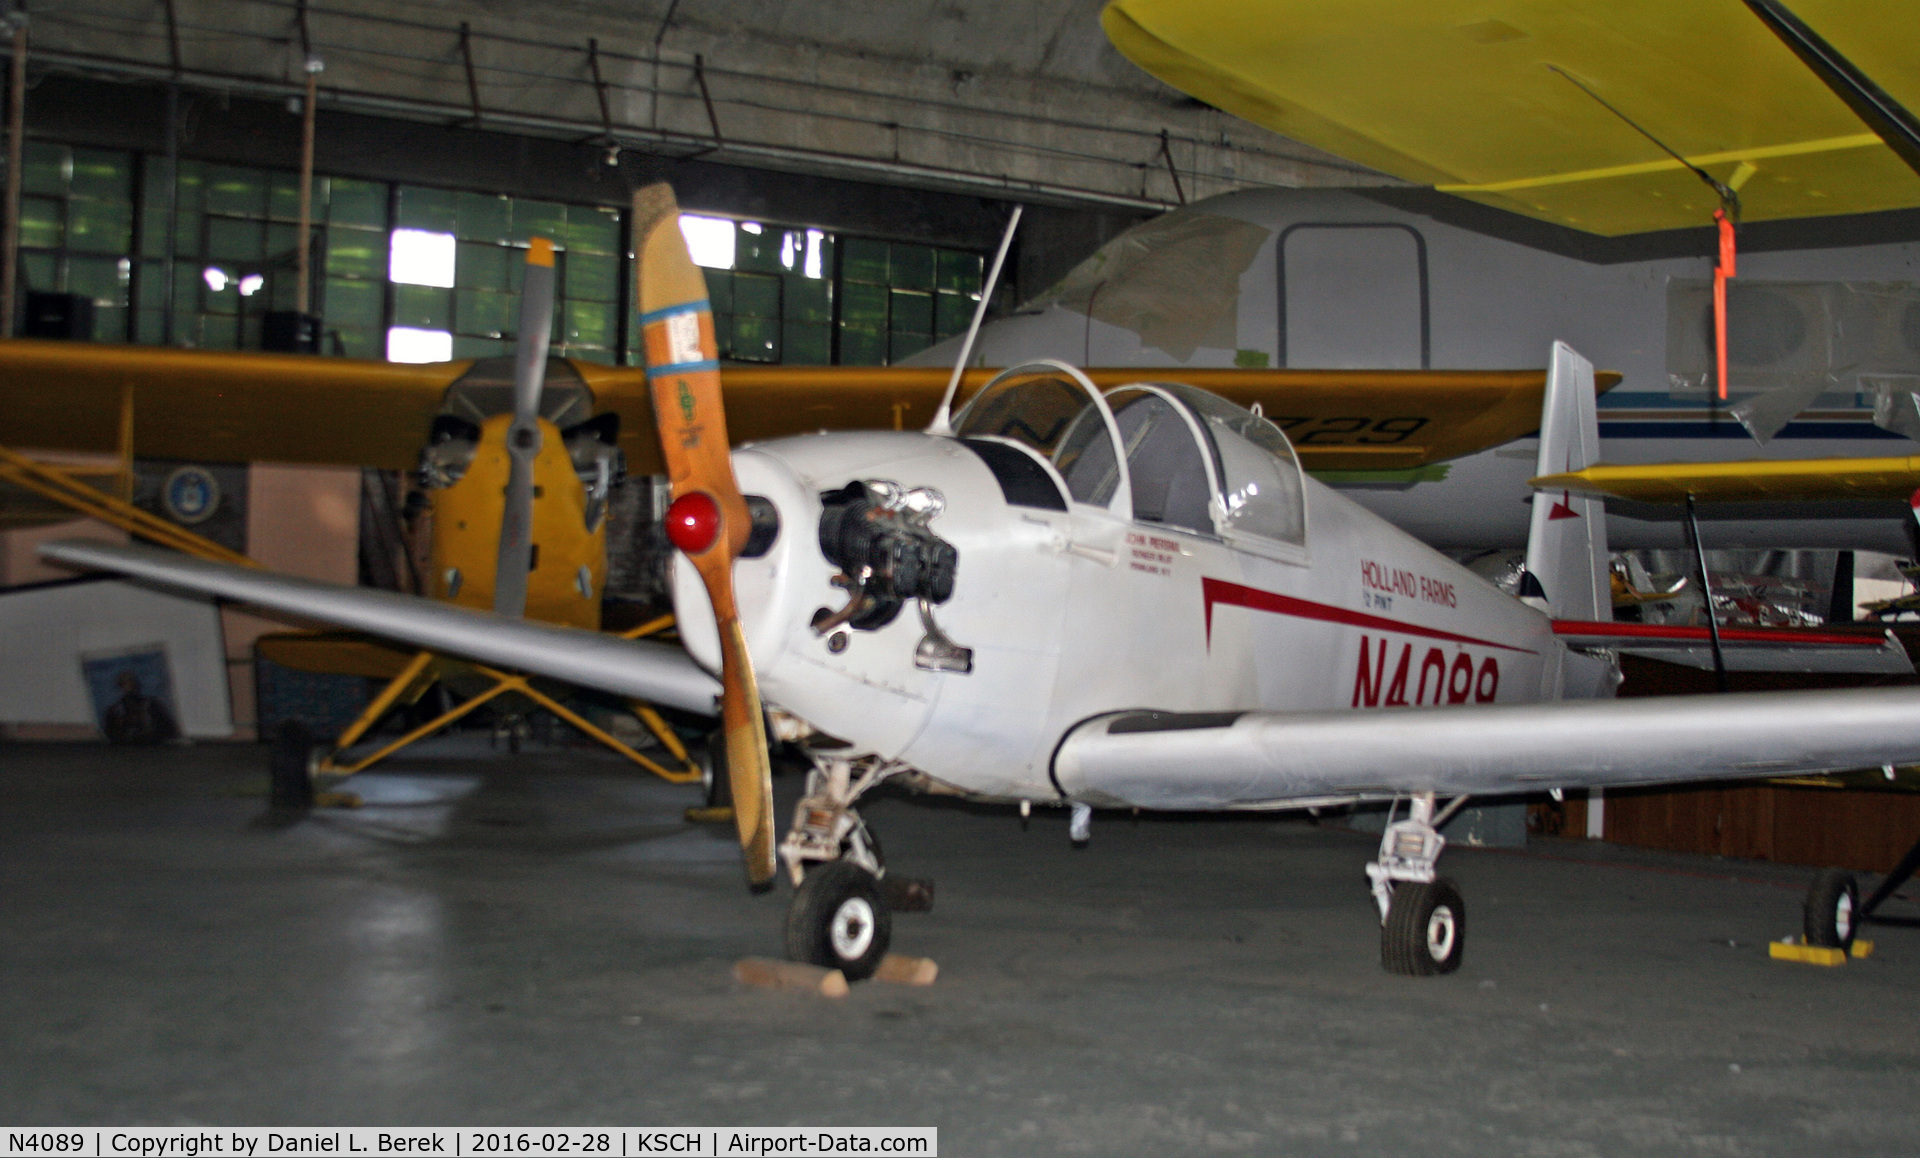 N4089, 1952 Mooney M-18LA C/N 128, Caught this charming little Mooney Mite in the big hangar at the Empire State Aerosciences Museum.